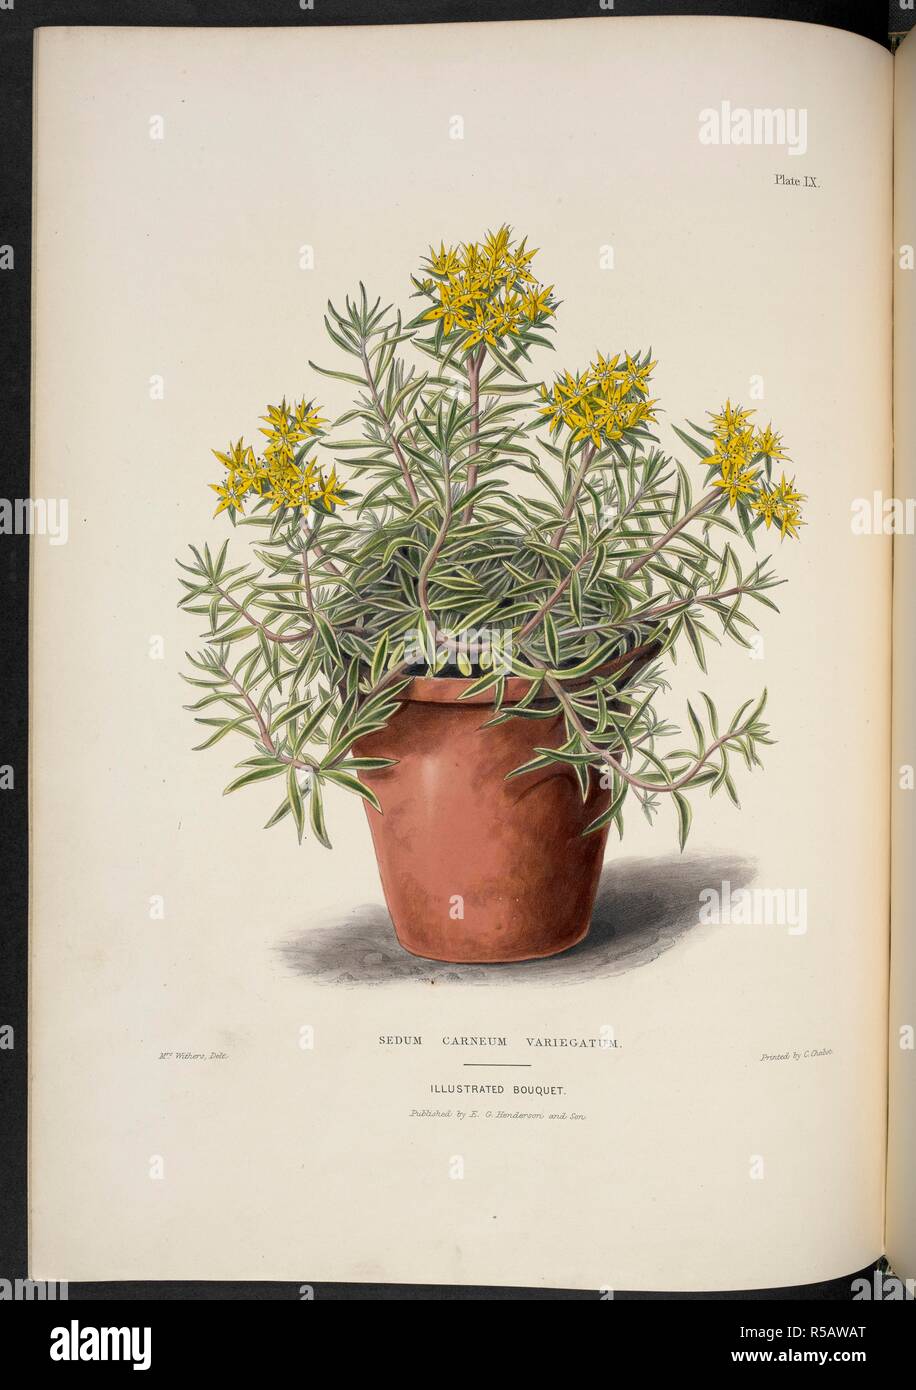 Sedum Carneum Variegatum. The Illustrated Bouquet, consisting of figures, with descriptions of new flowers. London, 1857-64. Source: 1823.c.13 plate 60. Author: Henderson, Edward George. Withers, Mrs. Stock Photo